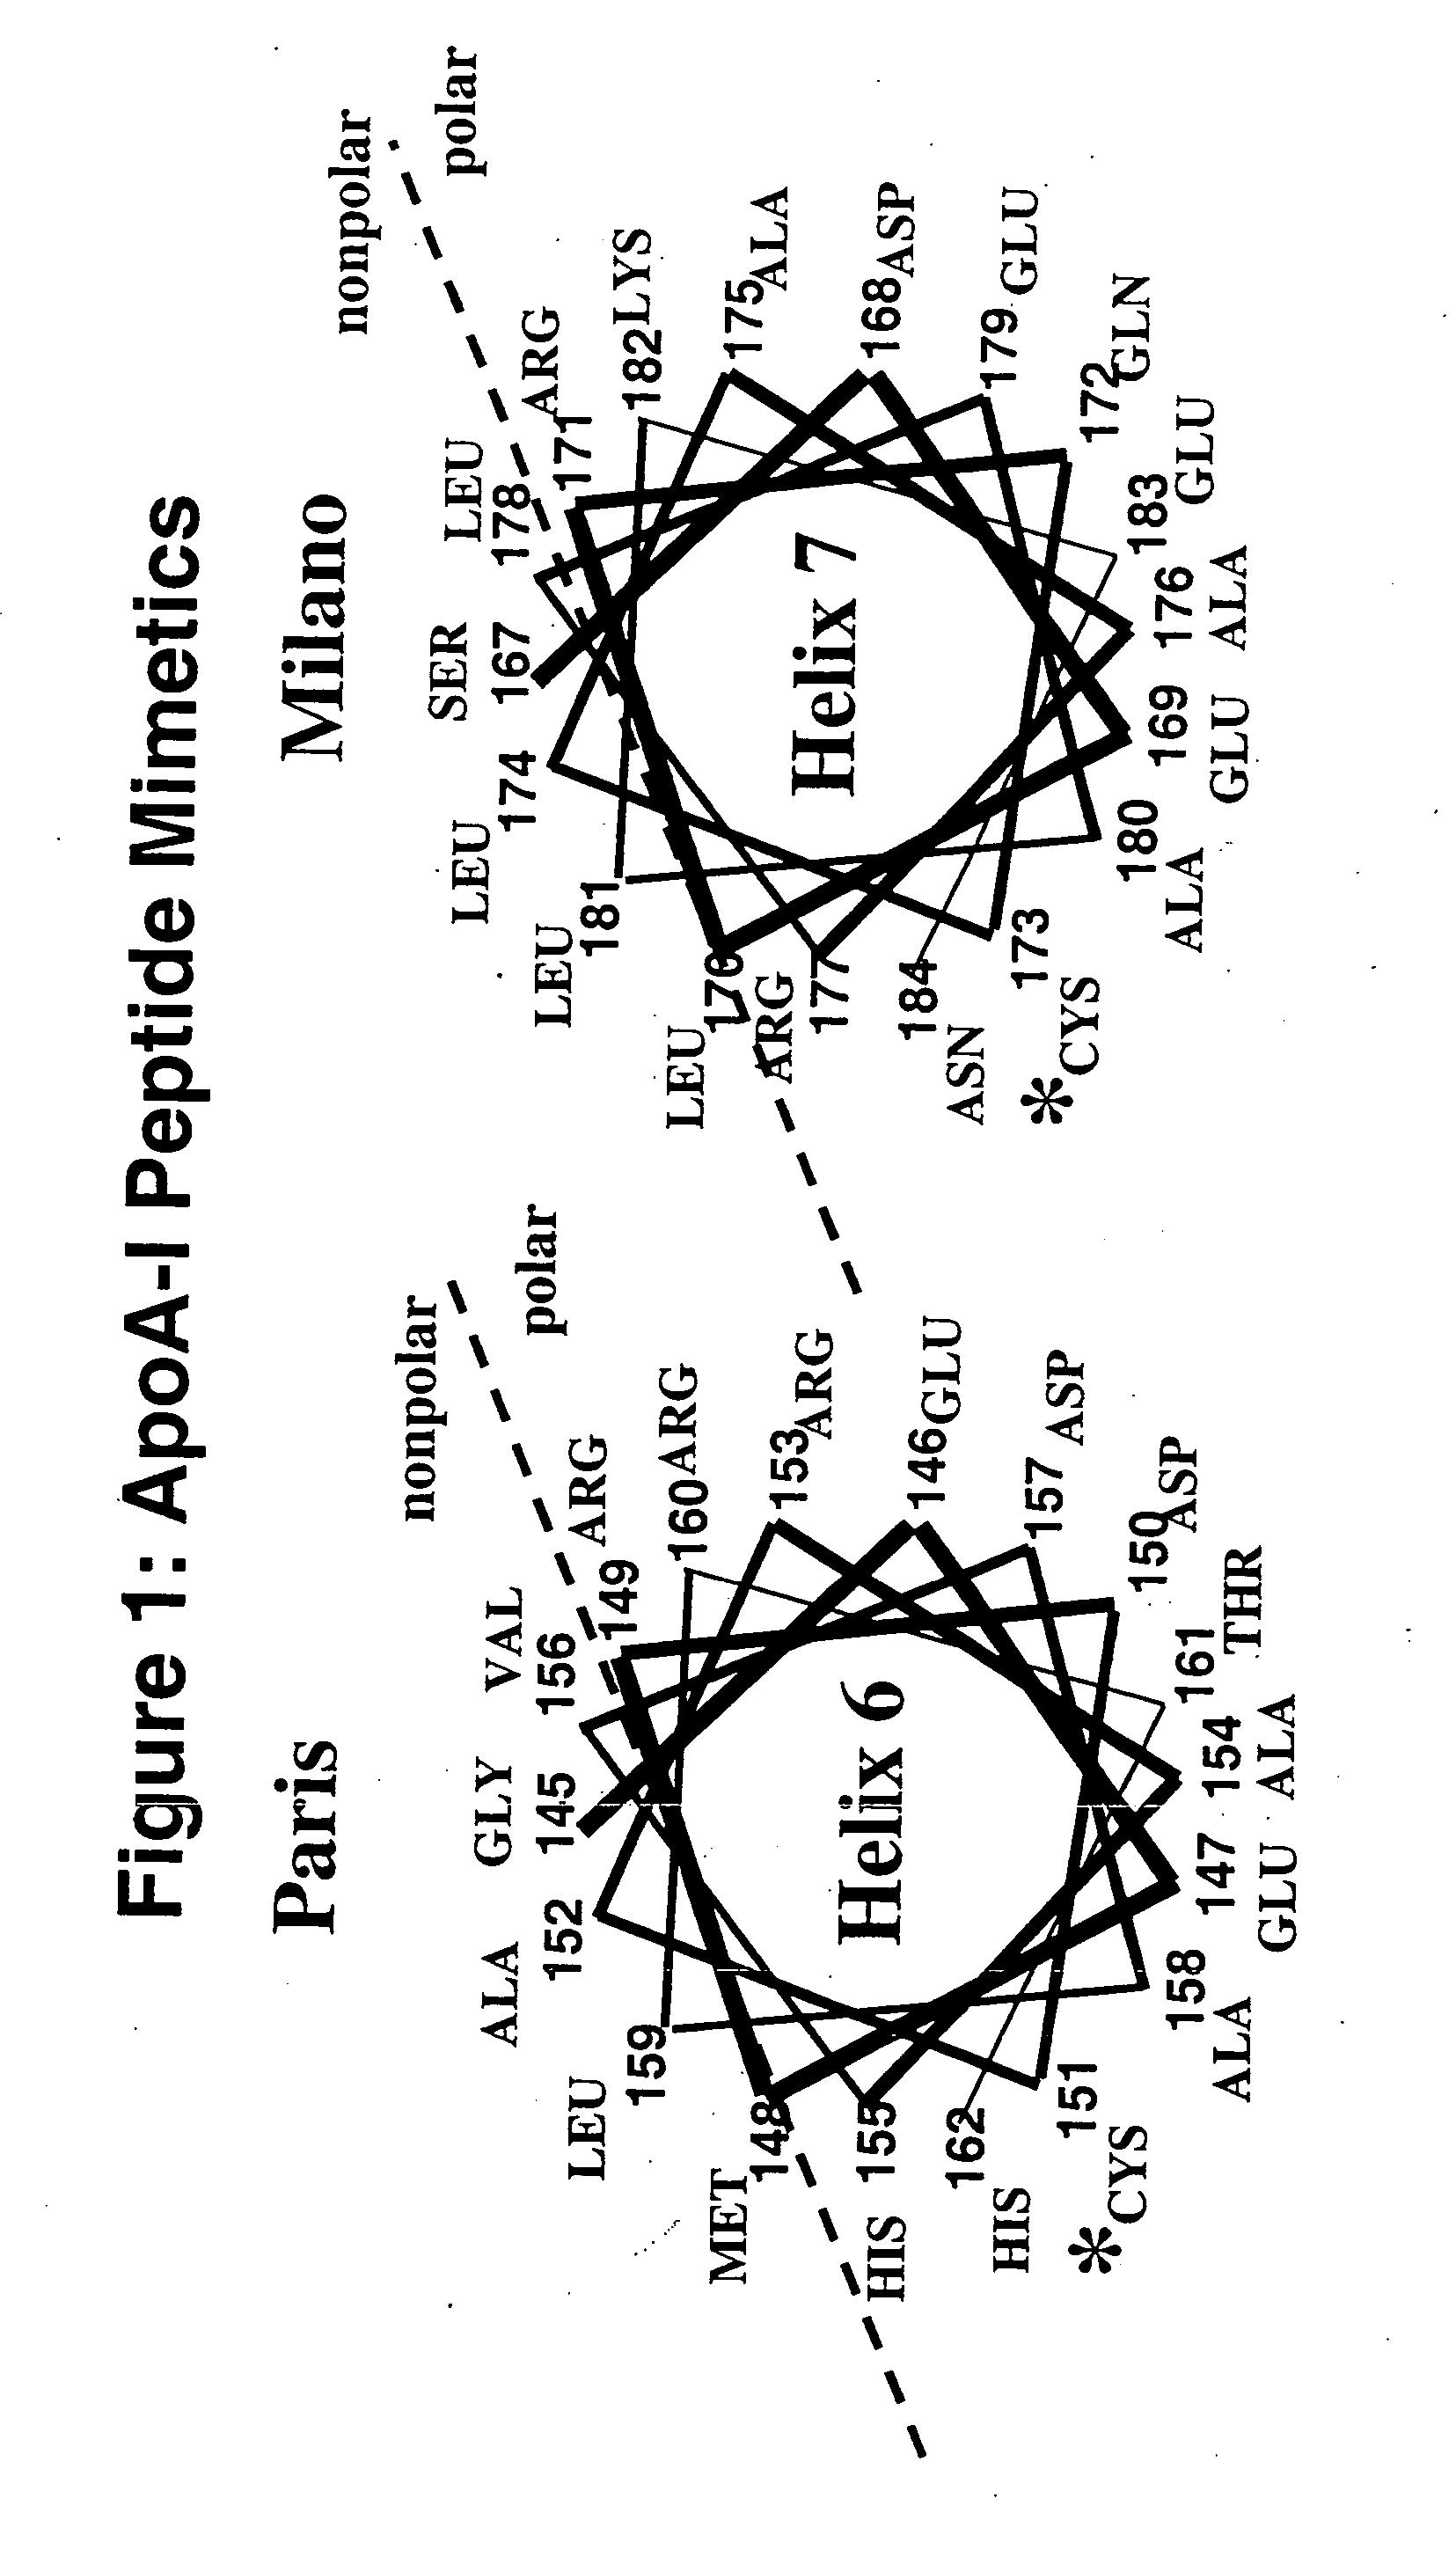 Cysteine-containing peptides having antioxidant properties